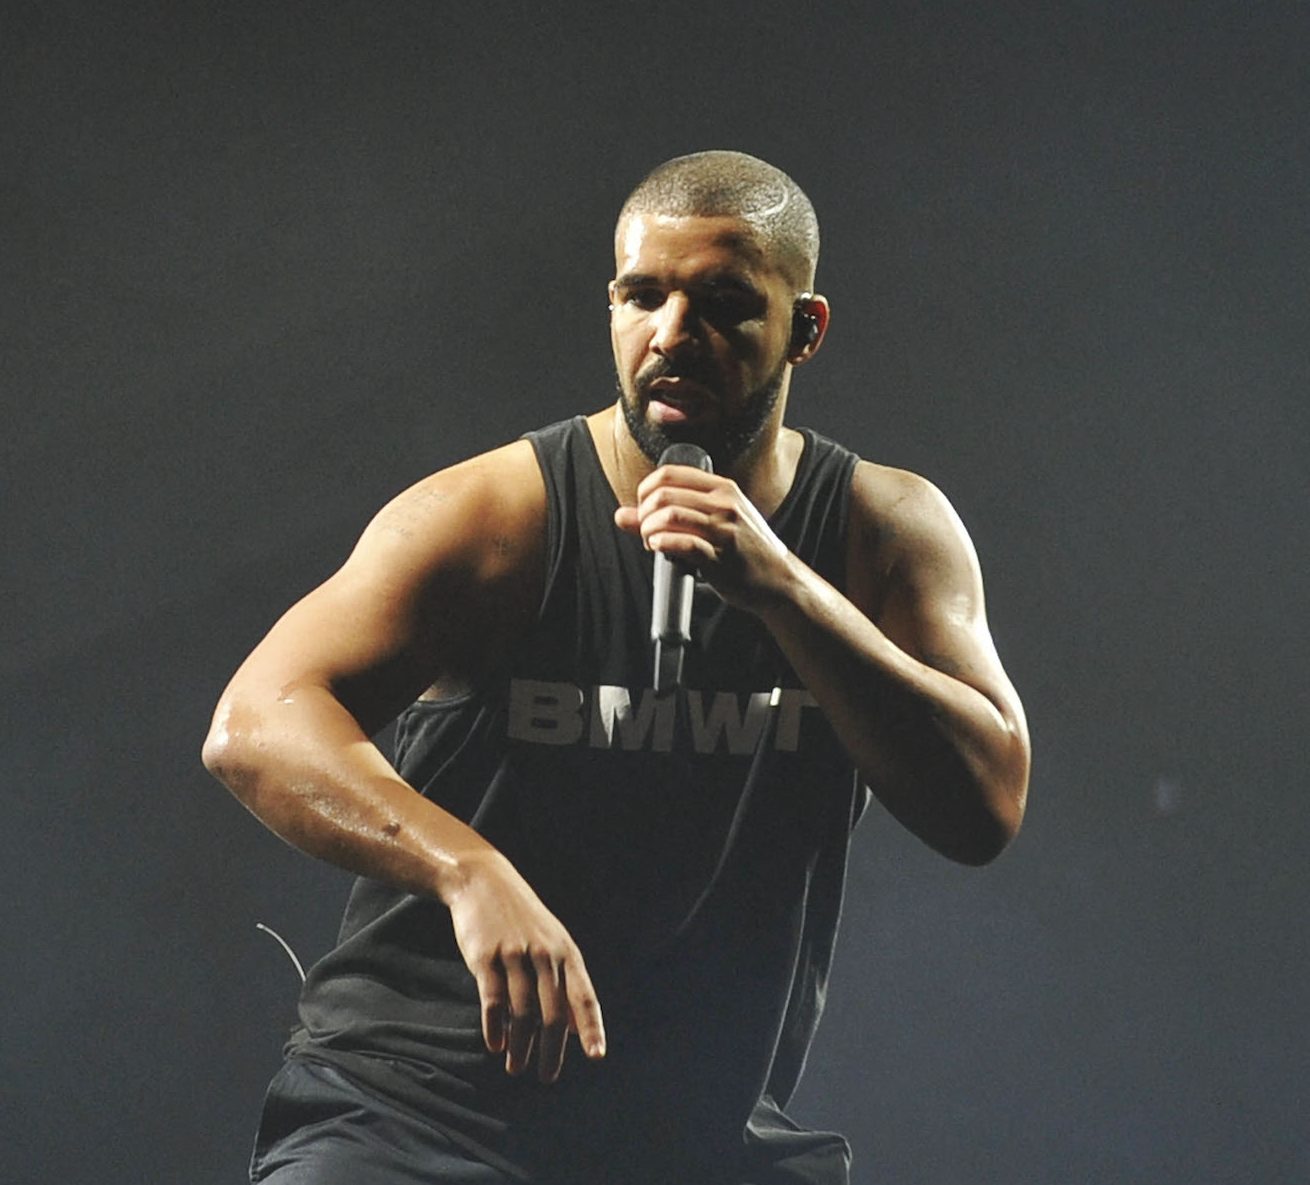 Drake Fan Who Threw 36G Bra On Stage Reveals Private DMs With Rapper After  Playboy Contract